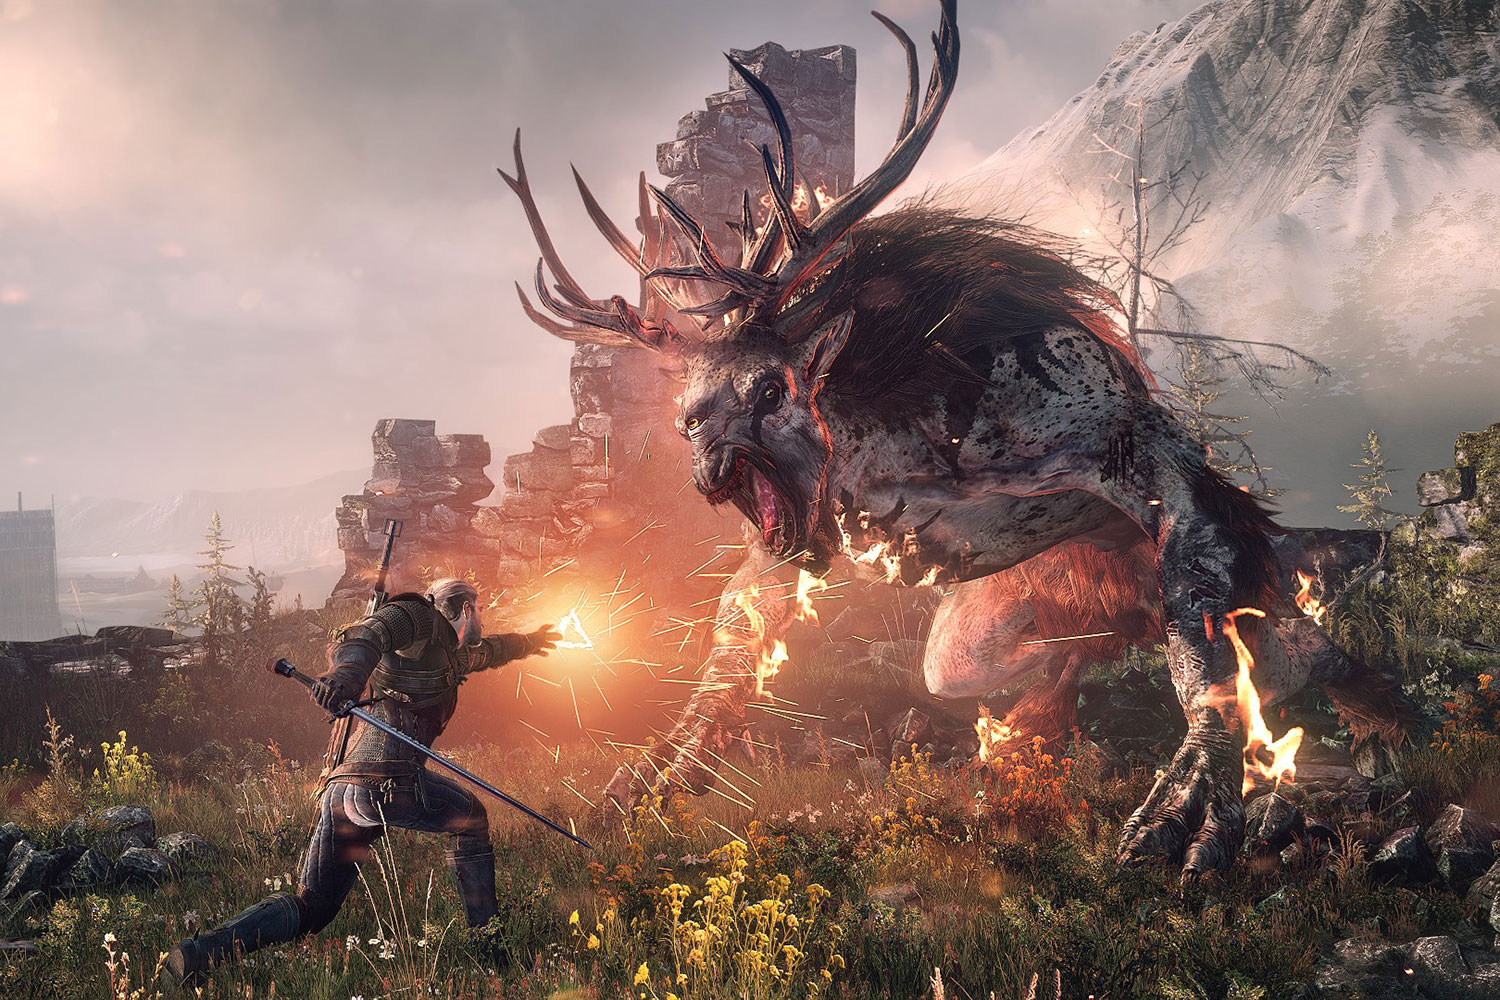 The Witcher 3 Returns To Top Selling Digital PS4 Games After